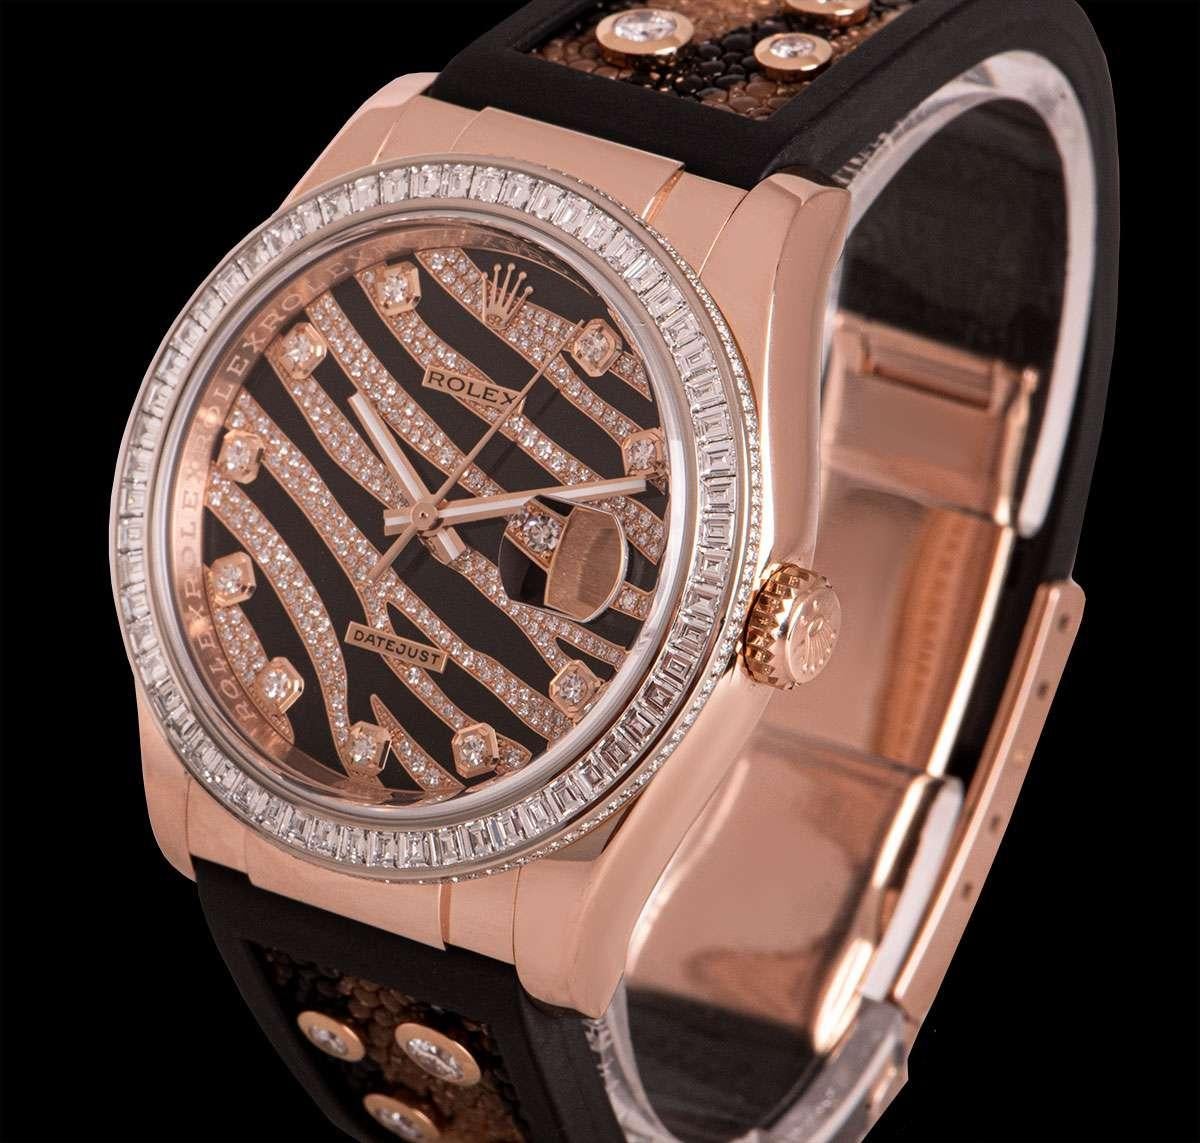 A 36 mm 18k Rose Gold Oyster Perpetual Datejust Zebra Gents Wristwatch, black zebra striped pave diamond dial set with 10 applied round brilliant cut diamond hour markers, date at 3 0'clock, a fixed 18k rose gold bezel set with 60 square cut